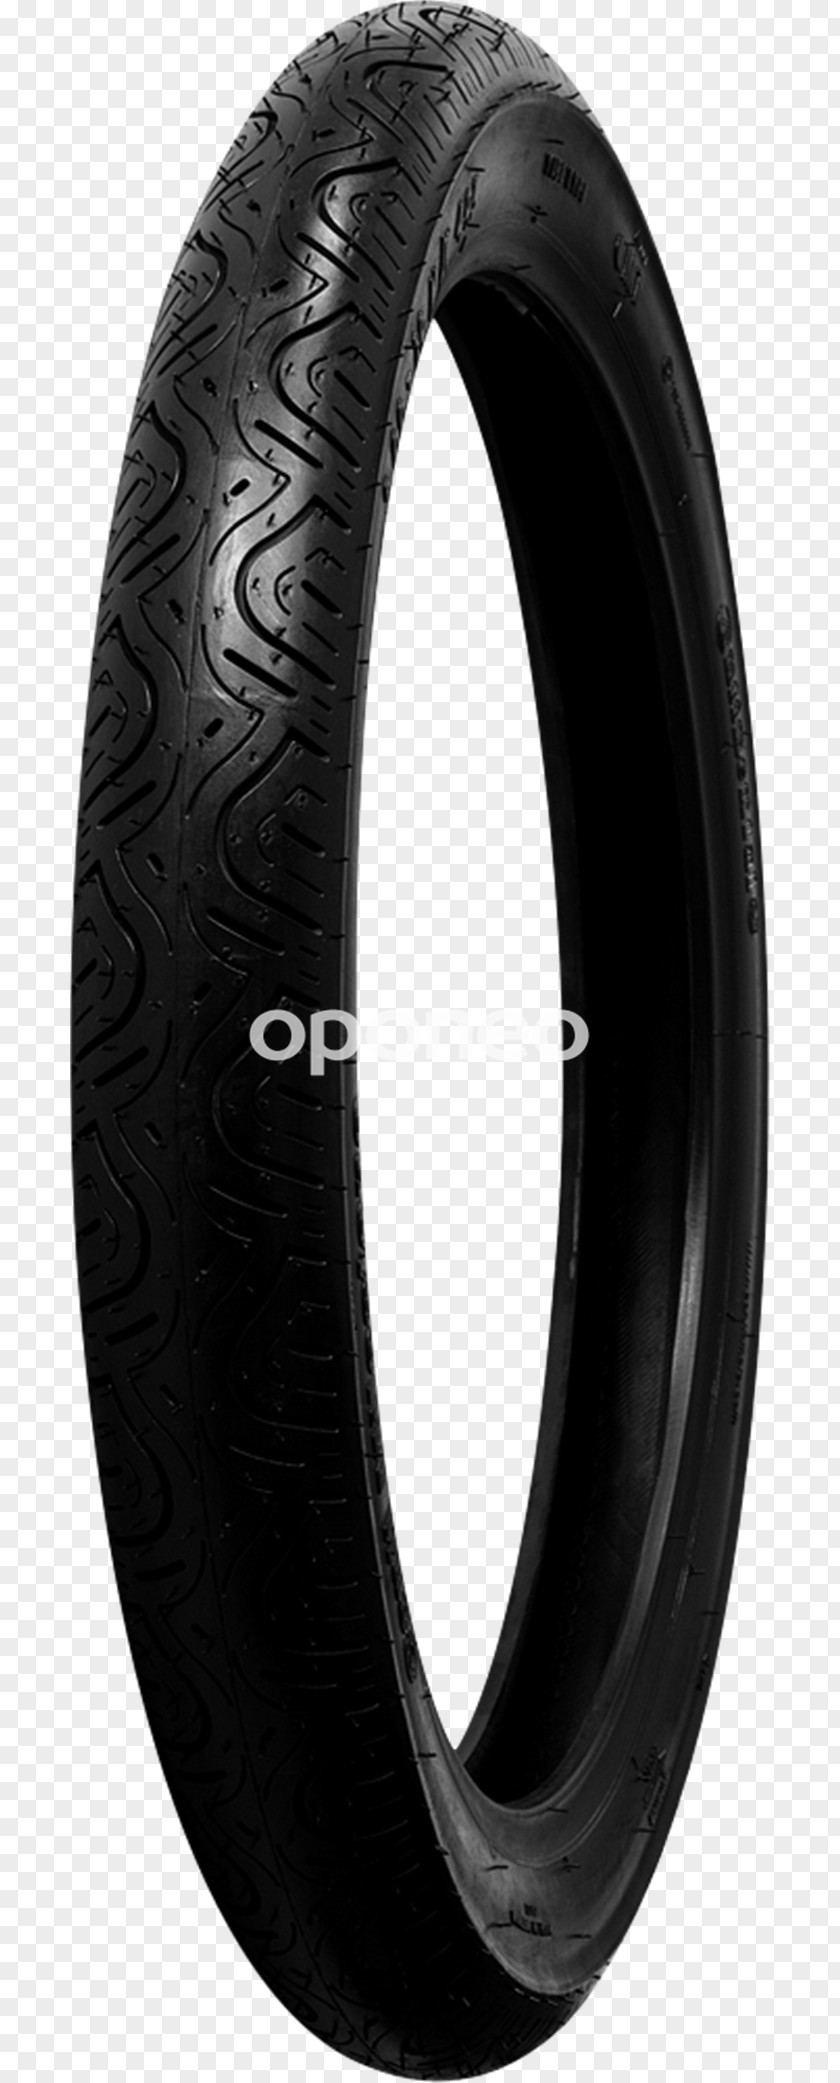 Continental Carved Scooter Motorcycle Tires Vehicle PNG